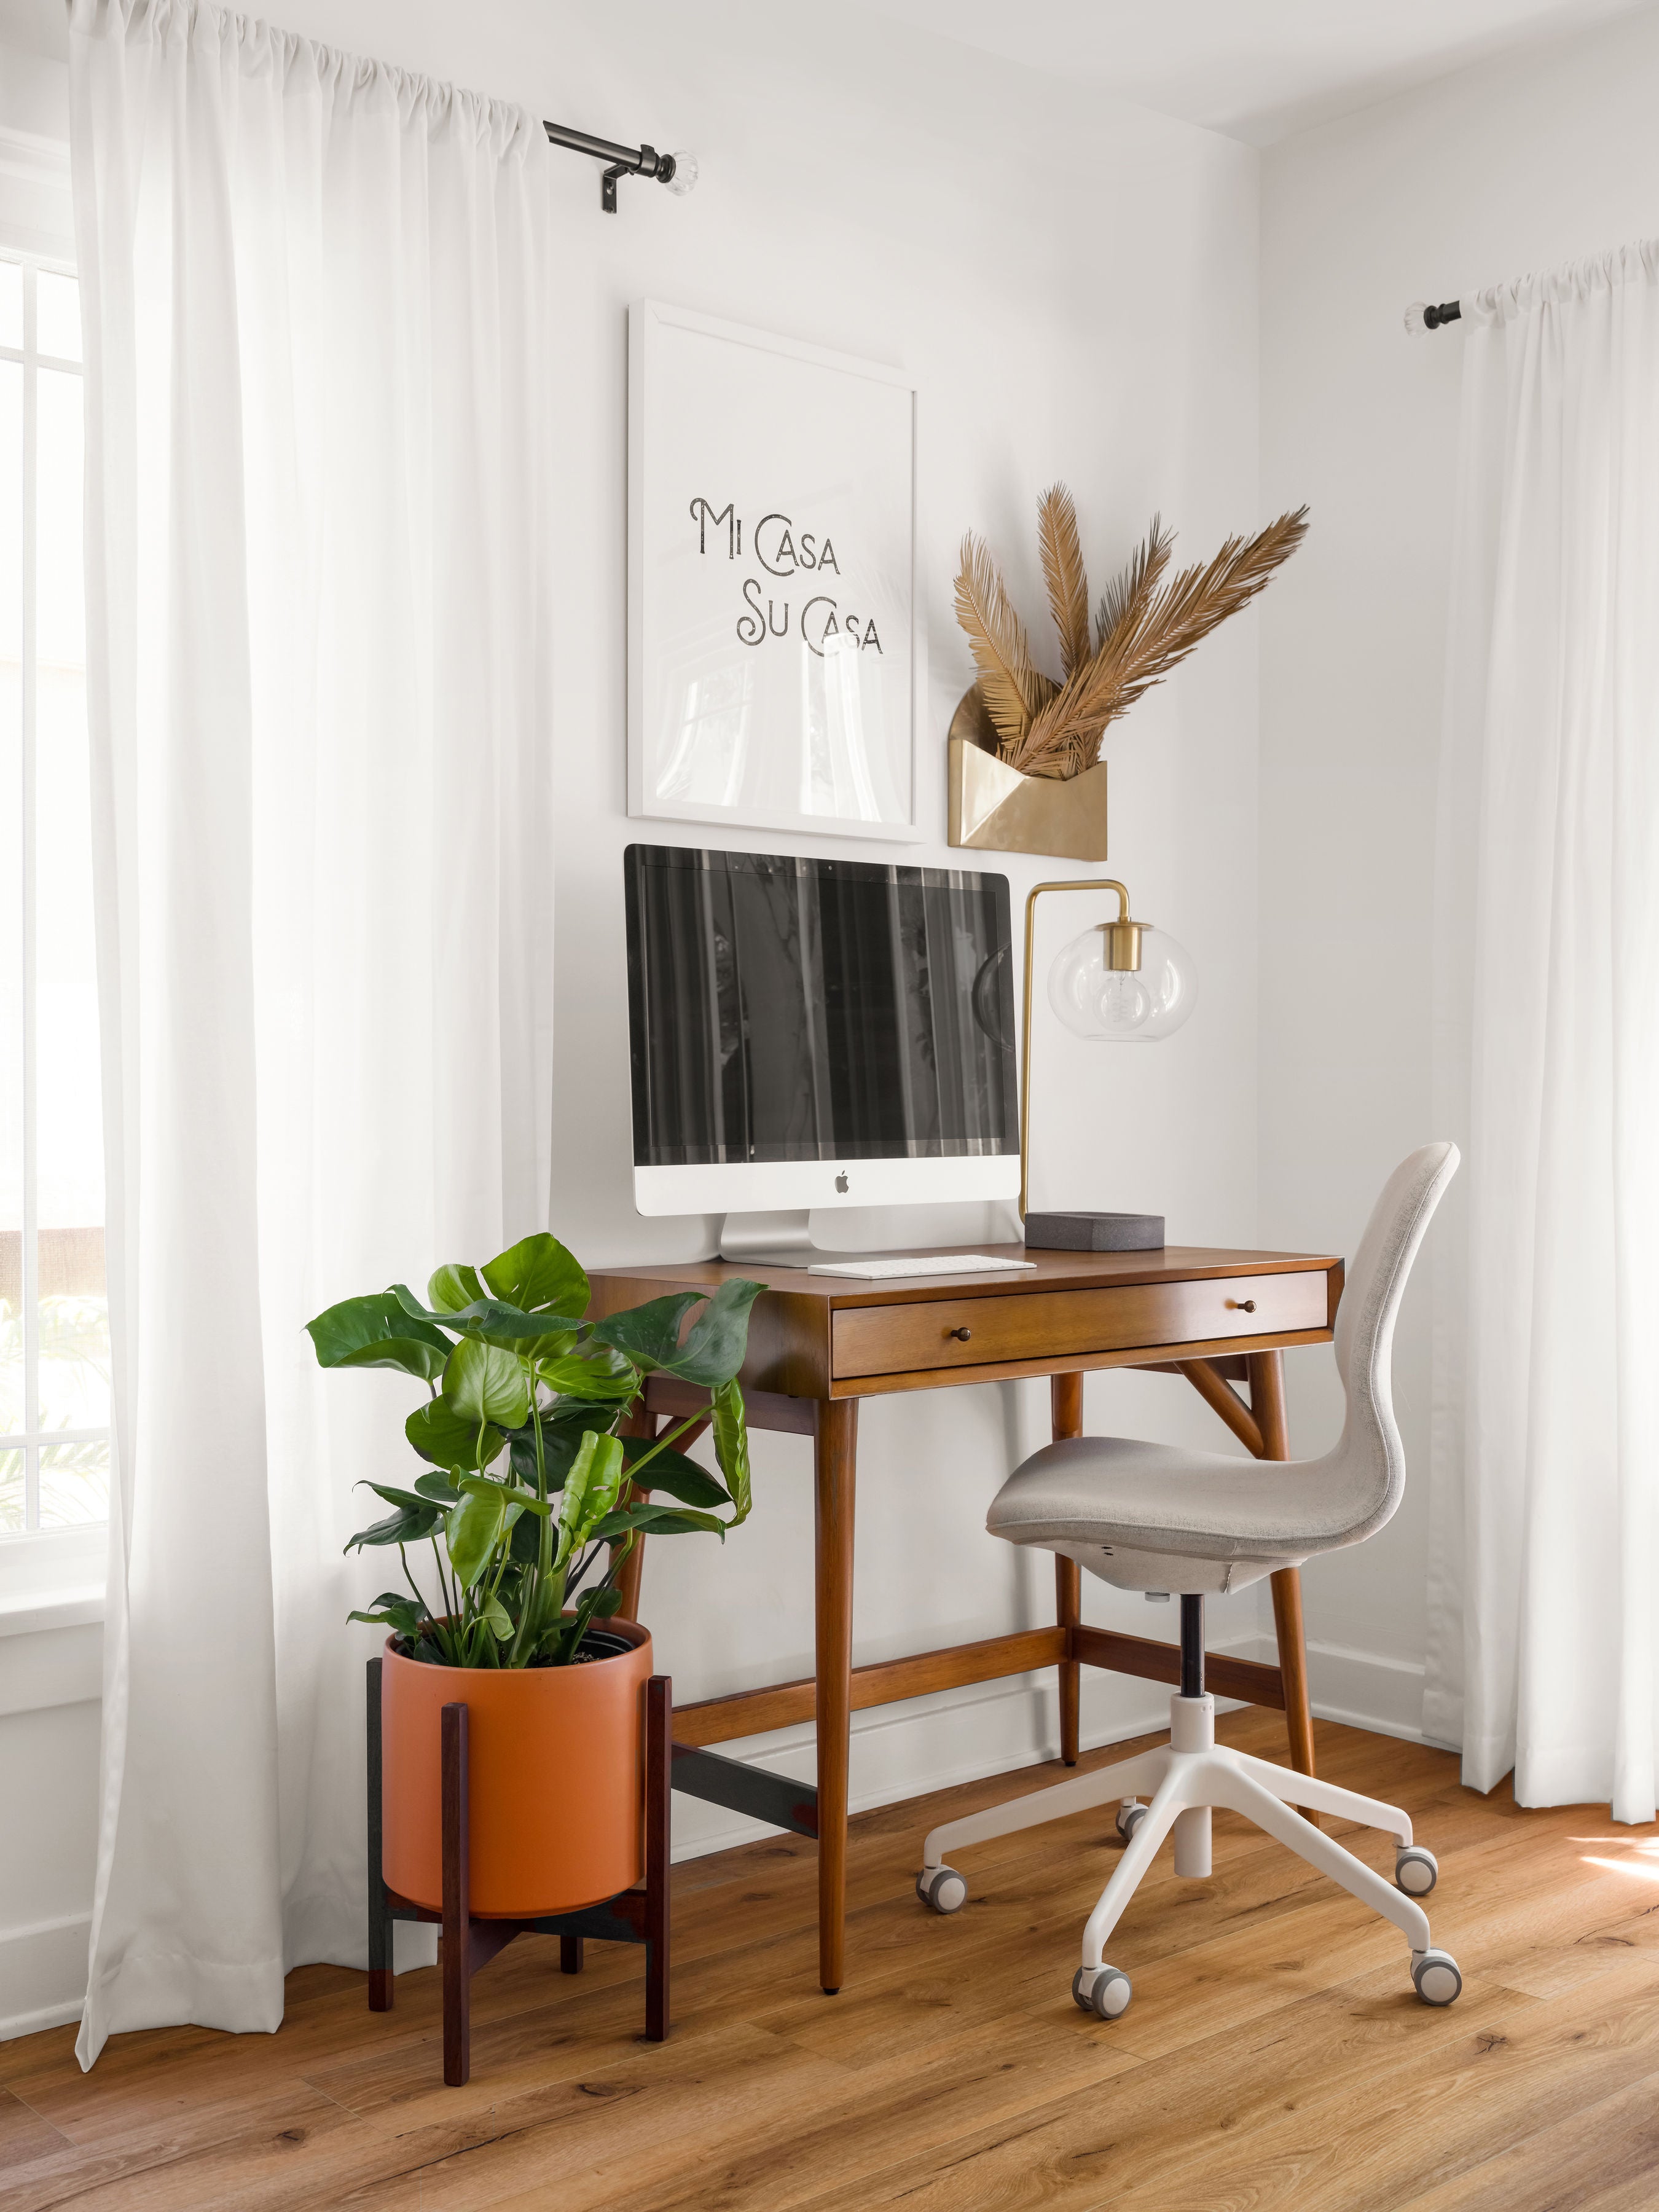 Image of Home Office with MidCentury Modern Ceramic Cylinder Planter next to Desk with Computer Monitor